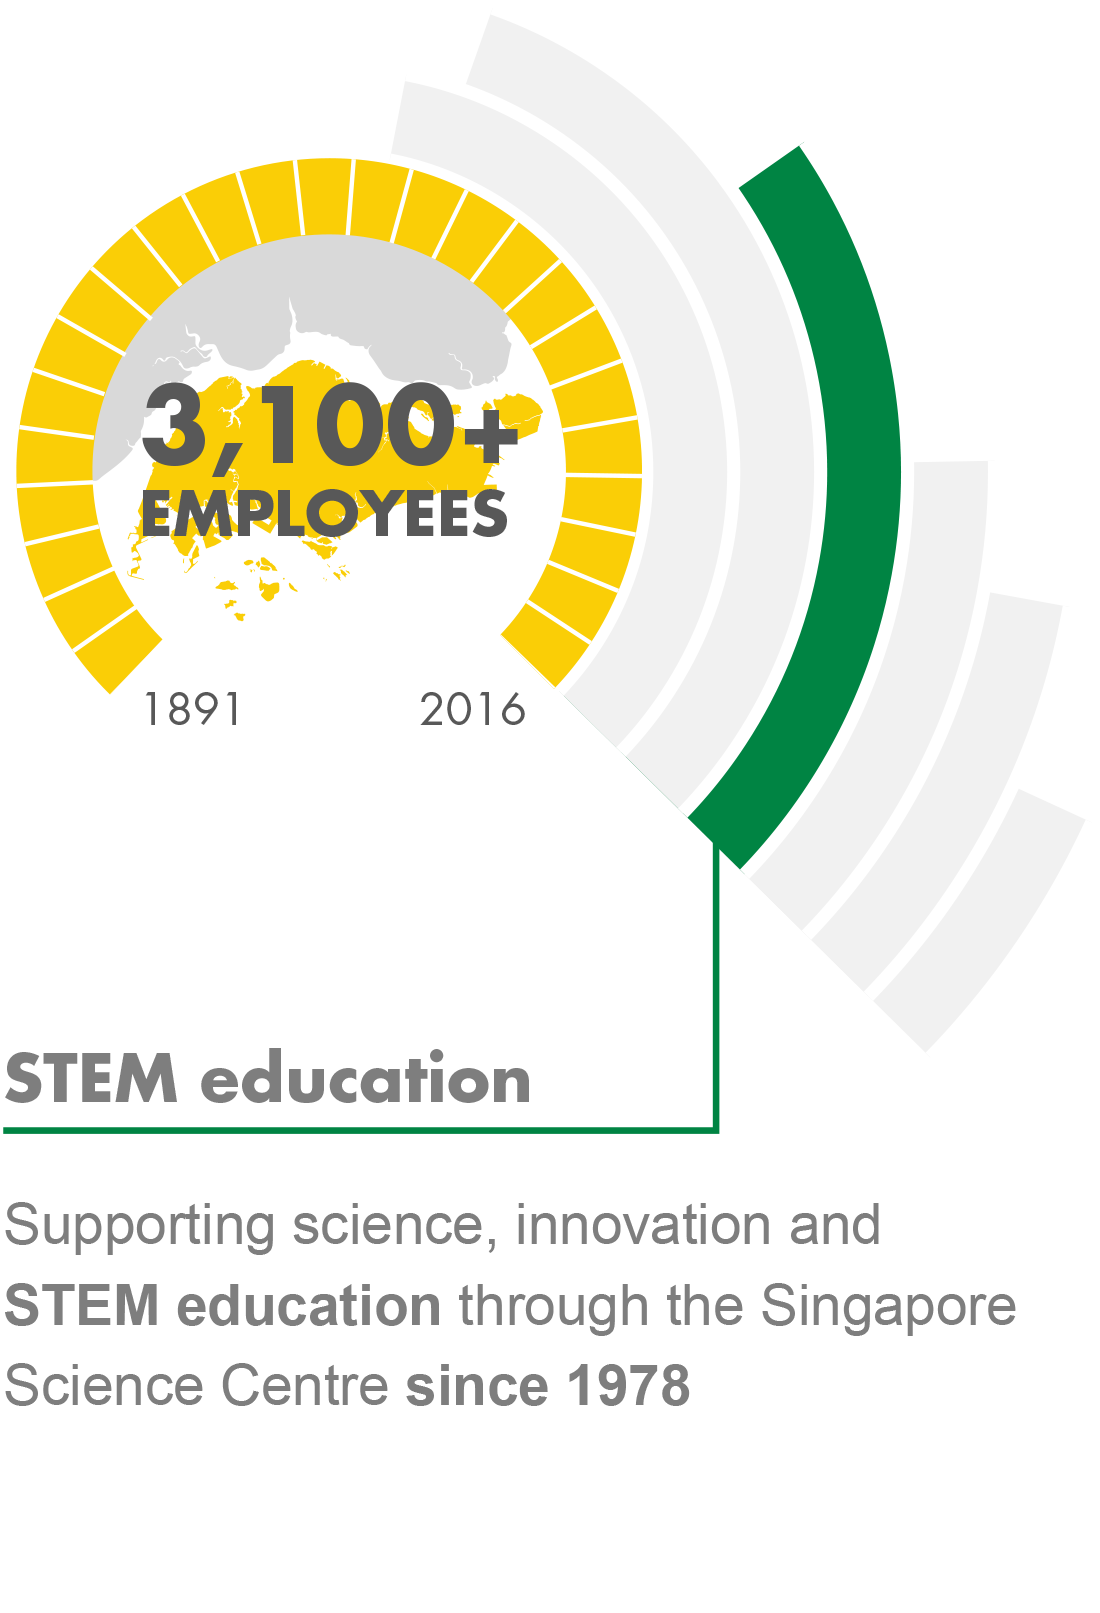 STEM Education - Supporting science, innovation and STEM education through the Singapore Science Centre since 1978